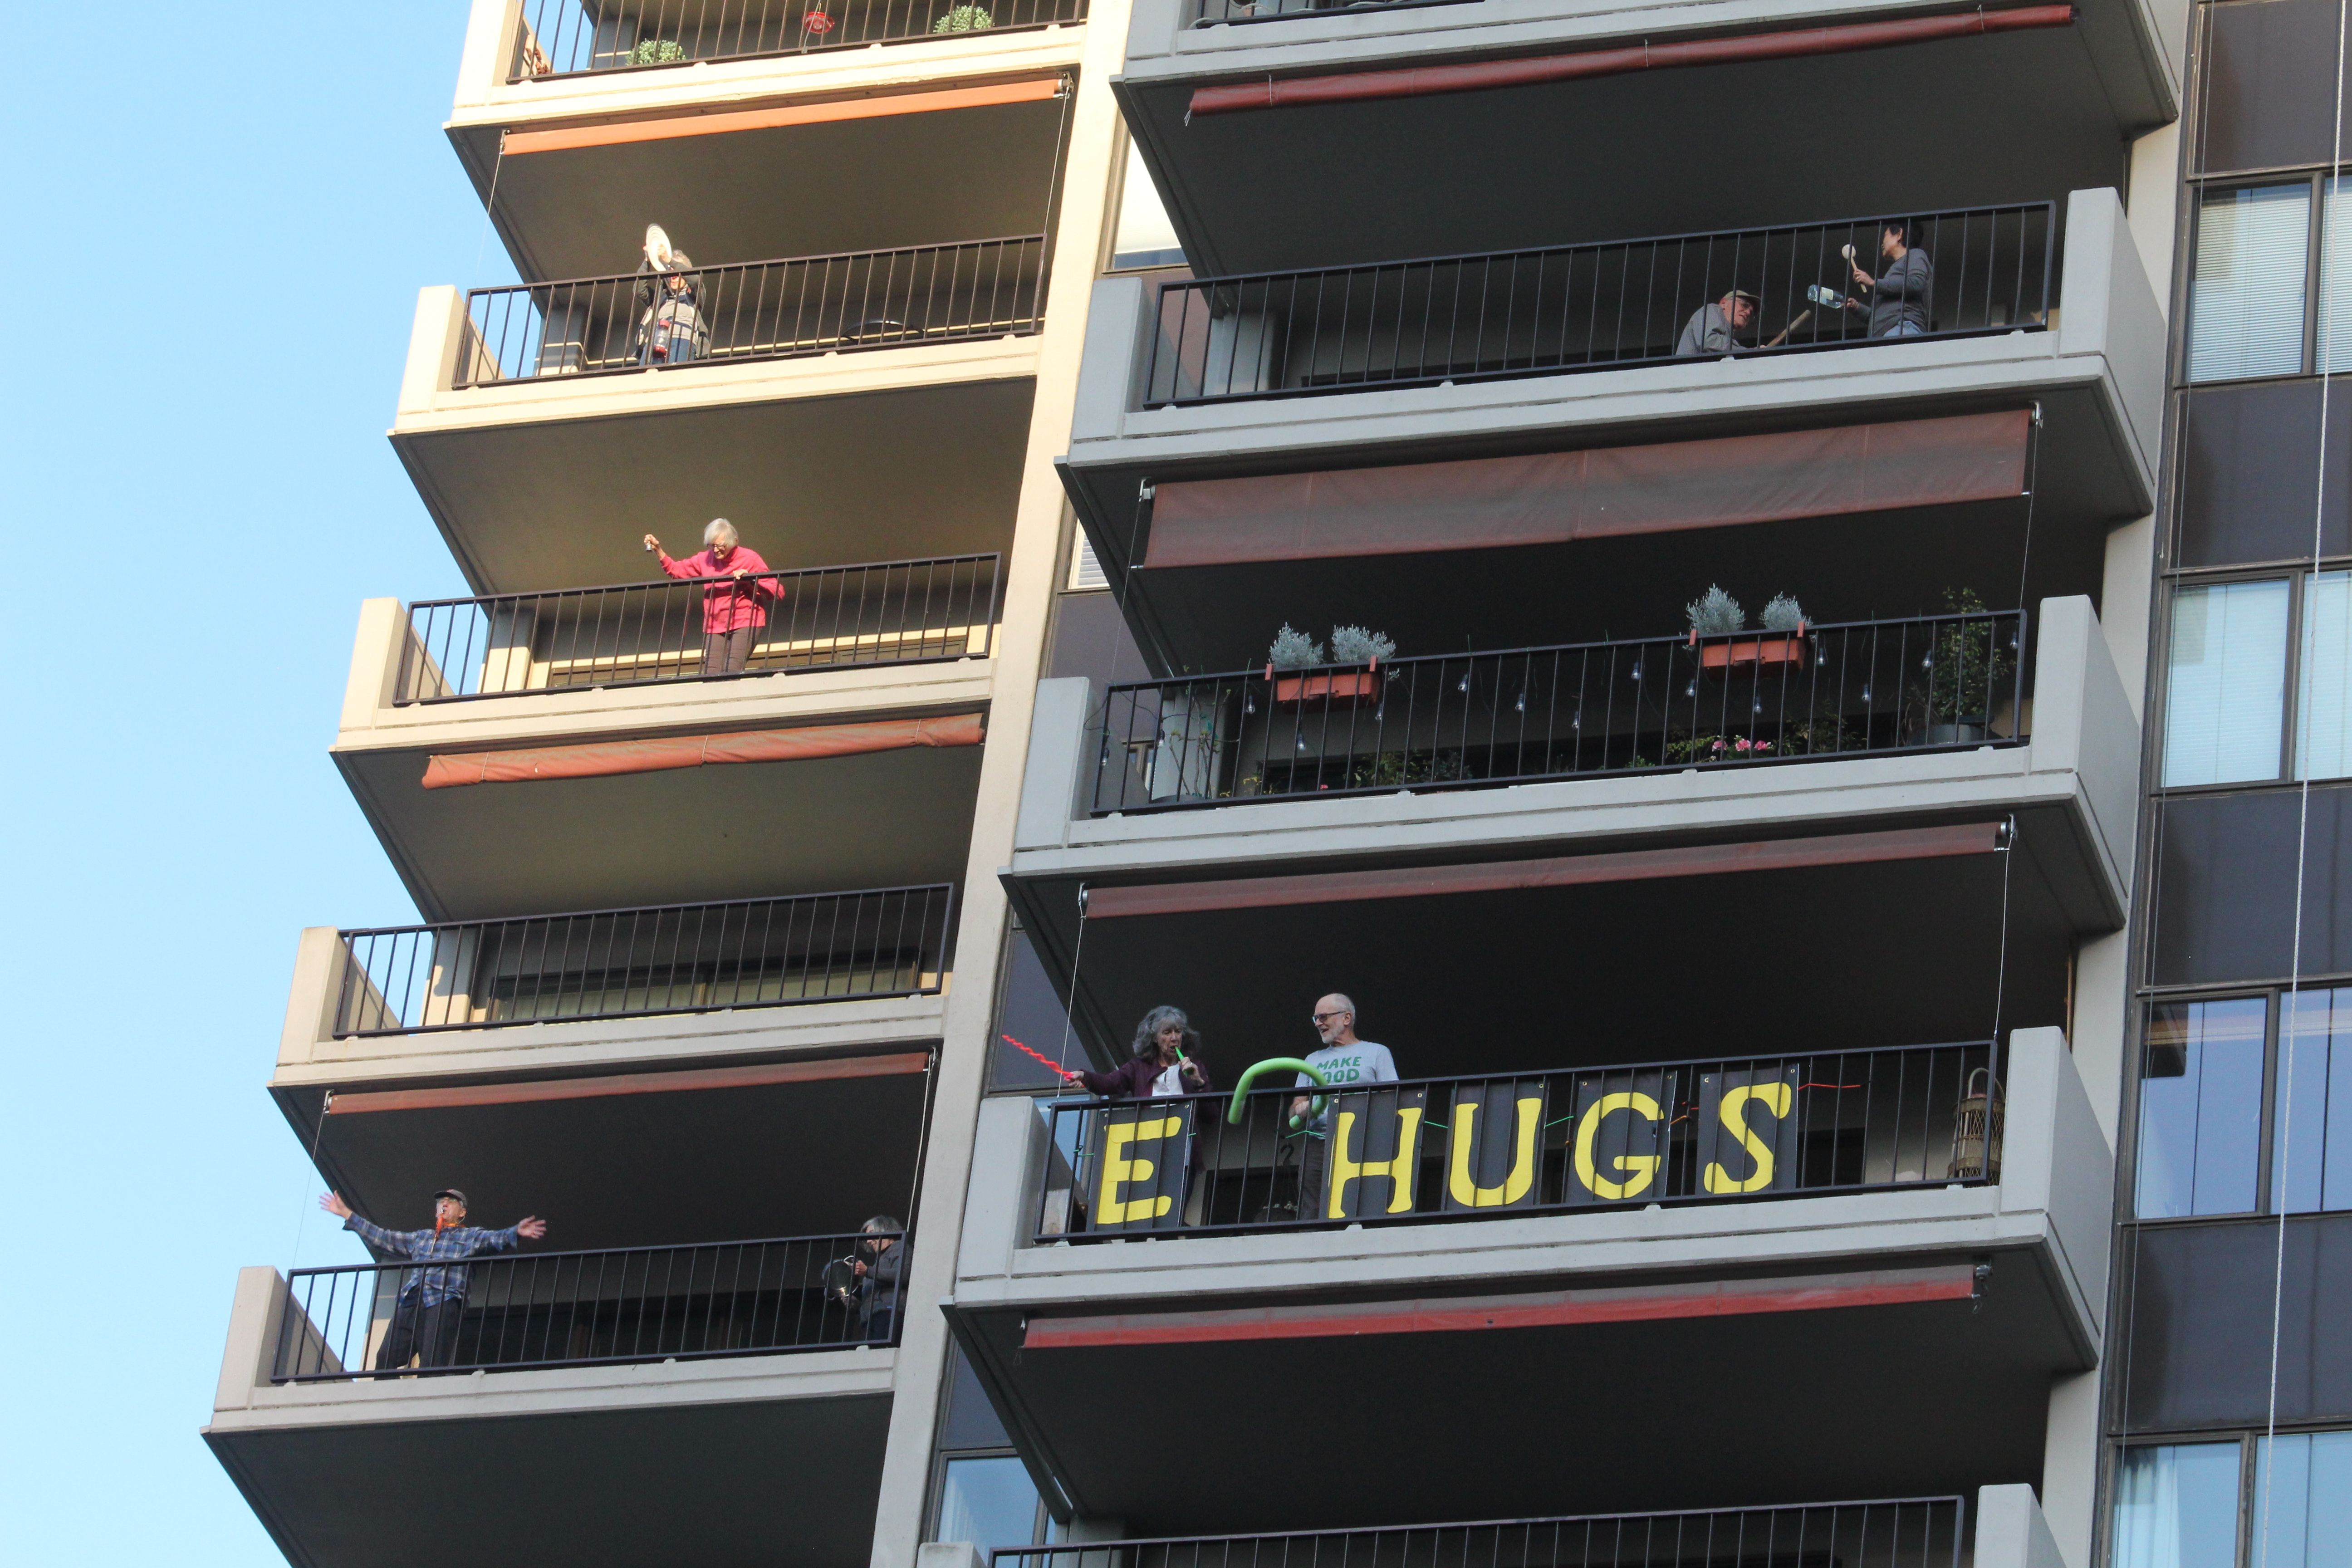 April 7, 2020 – One of the balconies of this building is decorated with a sign that reads, “E HUGS.” Image by Sarah Fahmy. United States, 2020.